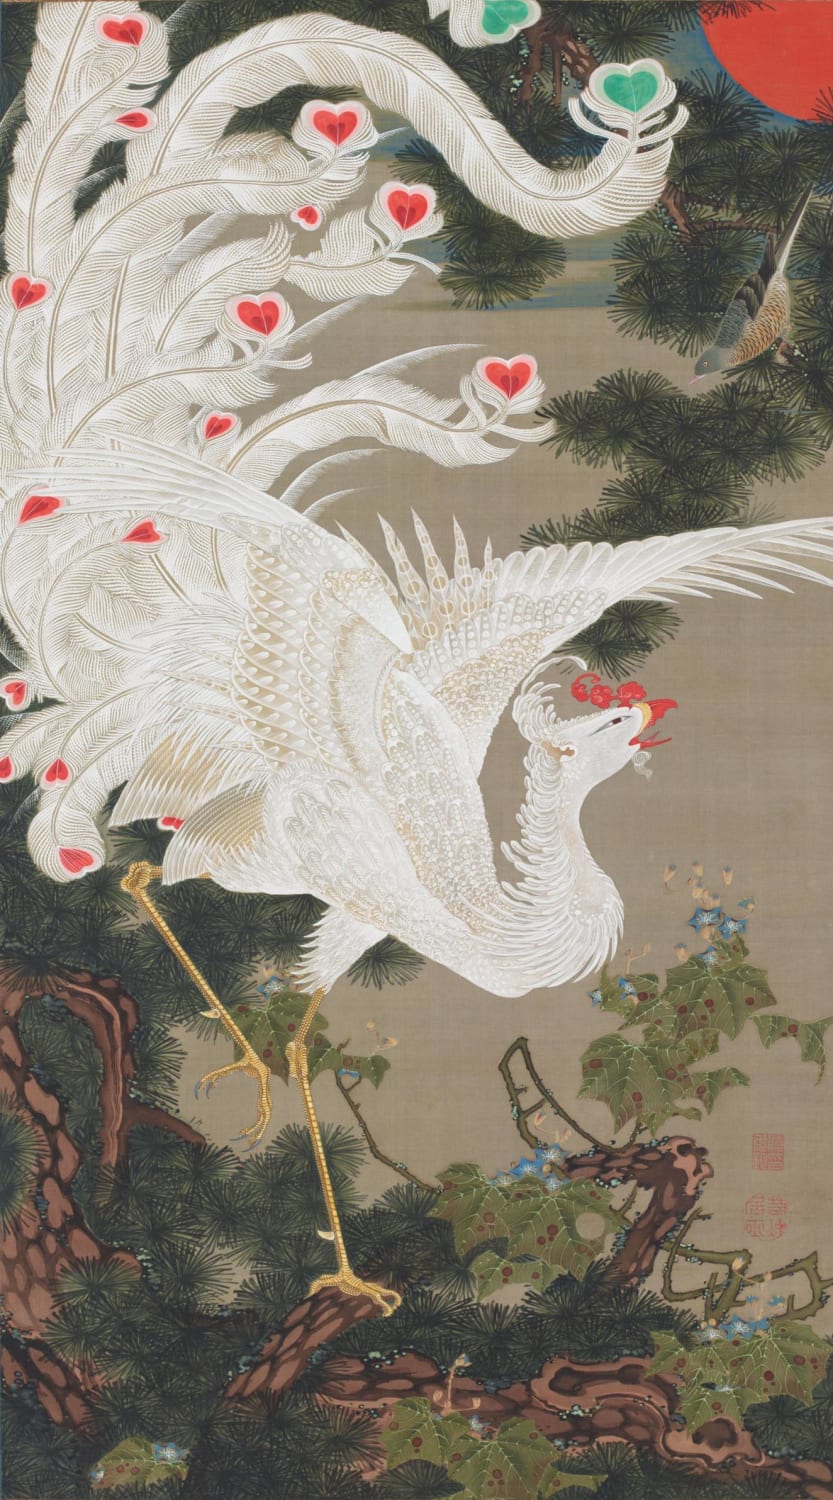 White Phoenix on Old Pine from the Colourful Realm of Living Beings, by Itō Jakuchū, ca. 1757-1766 CE